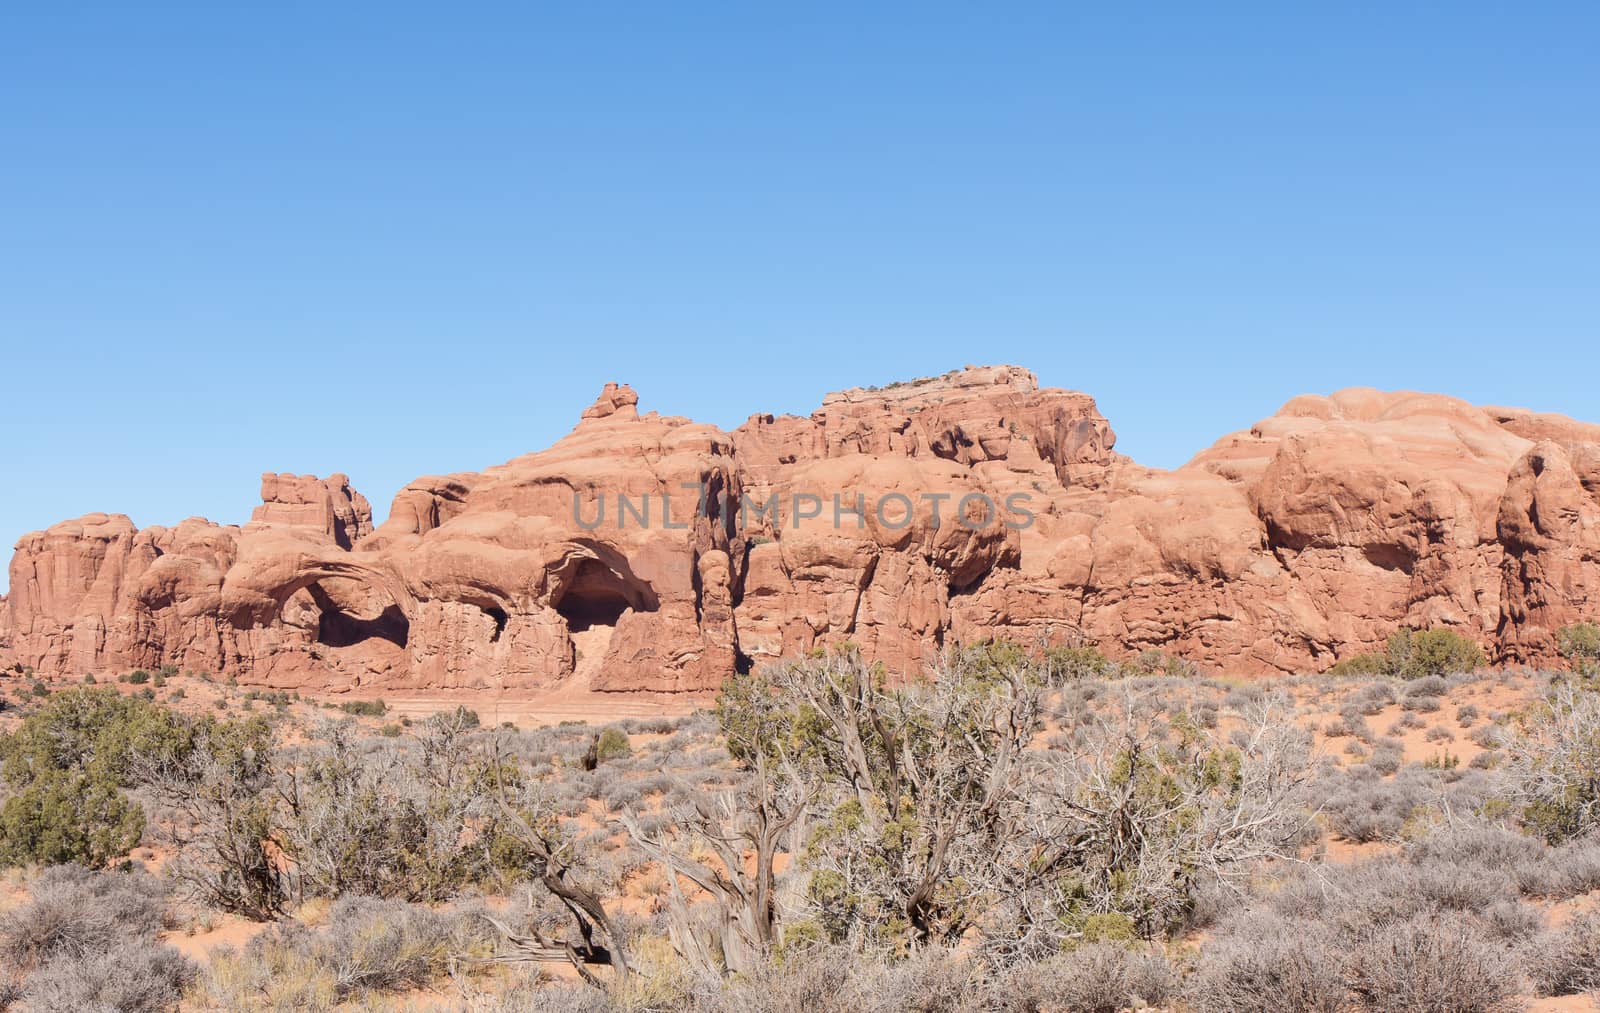 Potential new caves and arches can be seen forming in this rock formation at Arches National Park.